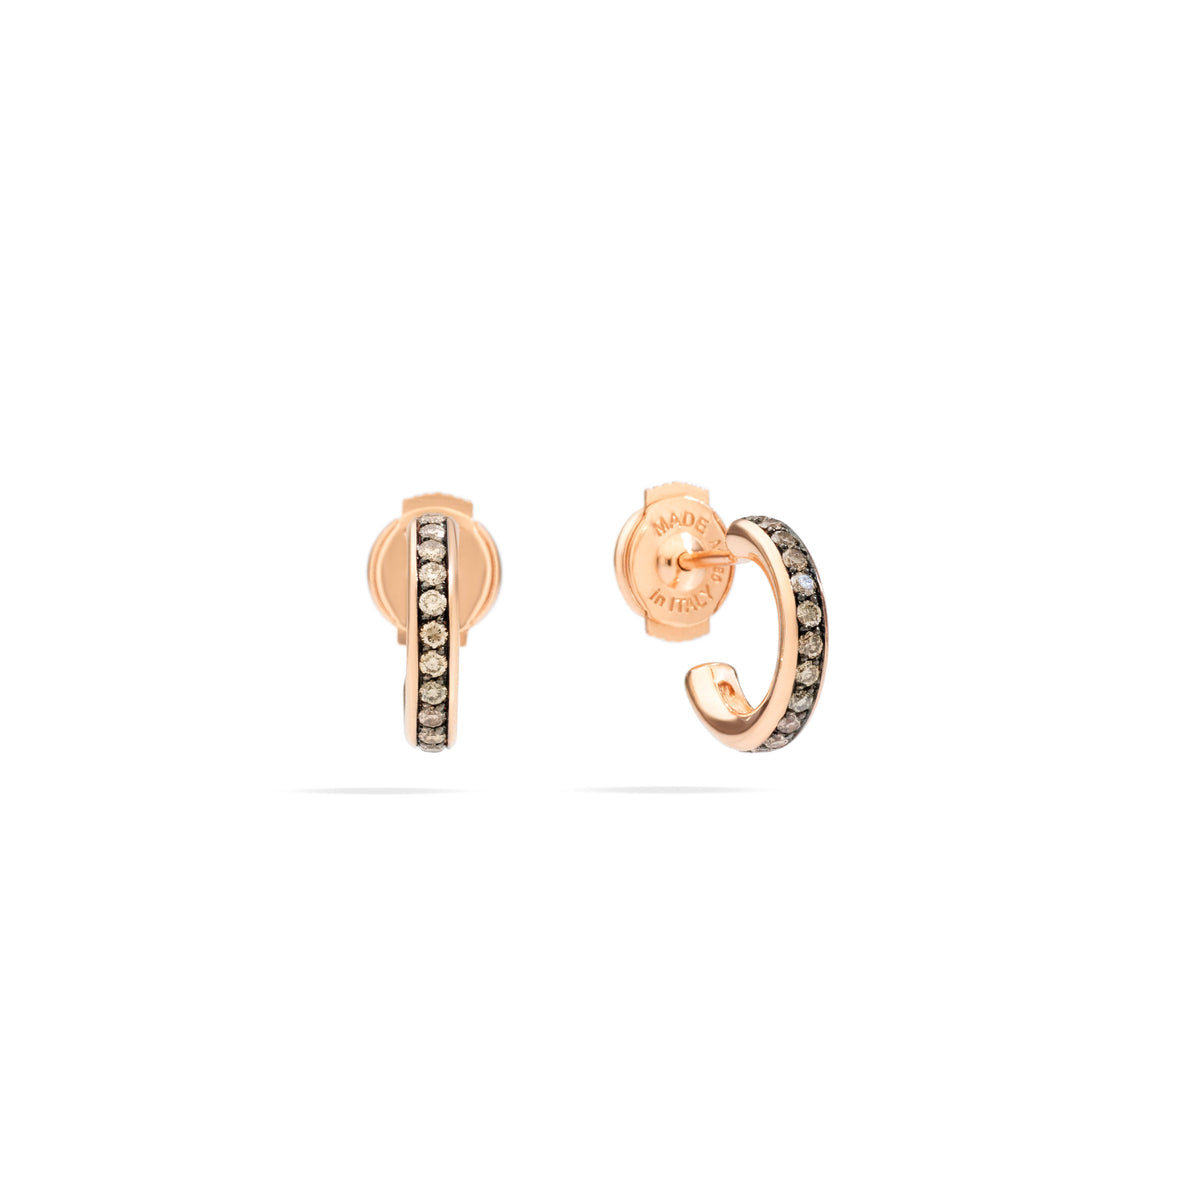 Iconica Earrings in 18k Rose Gold with Brown Diamonds - Orsini Jewellers NZ